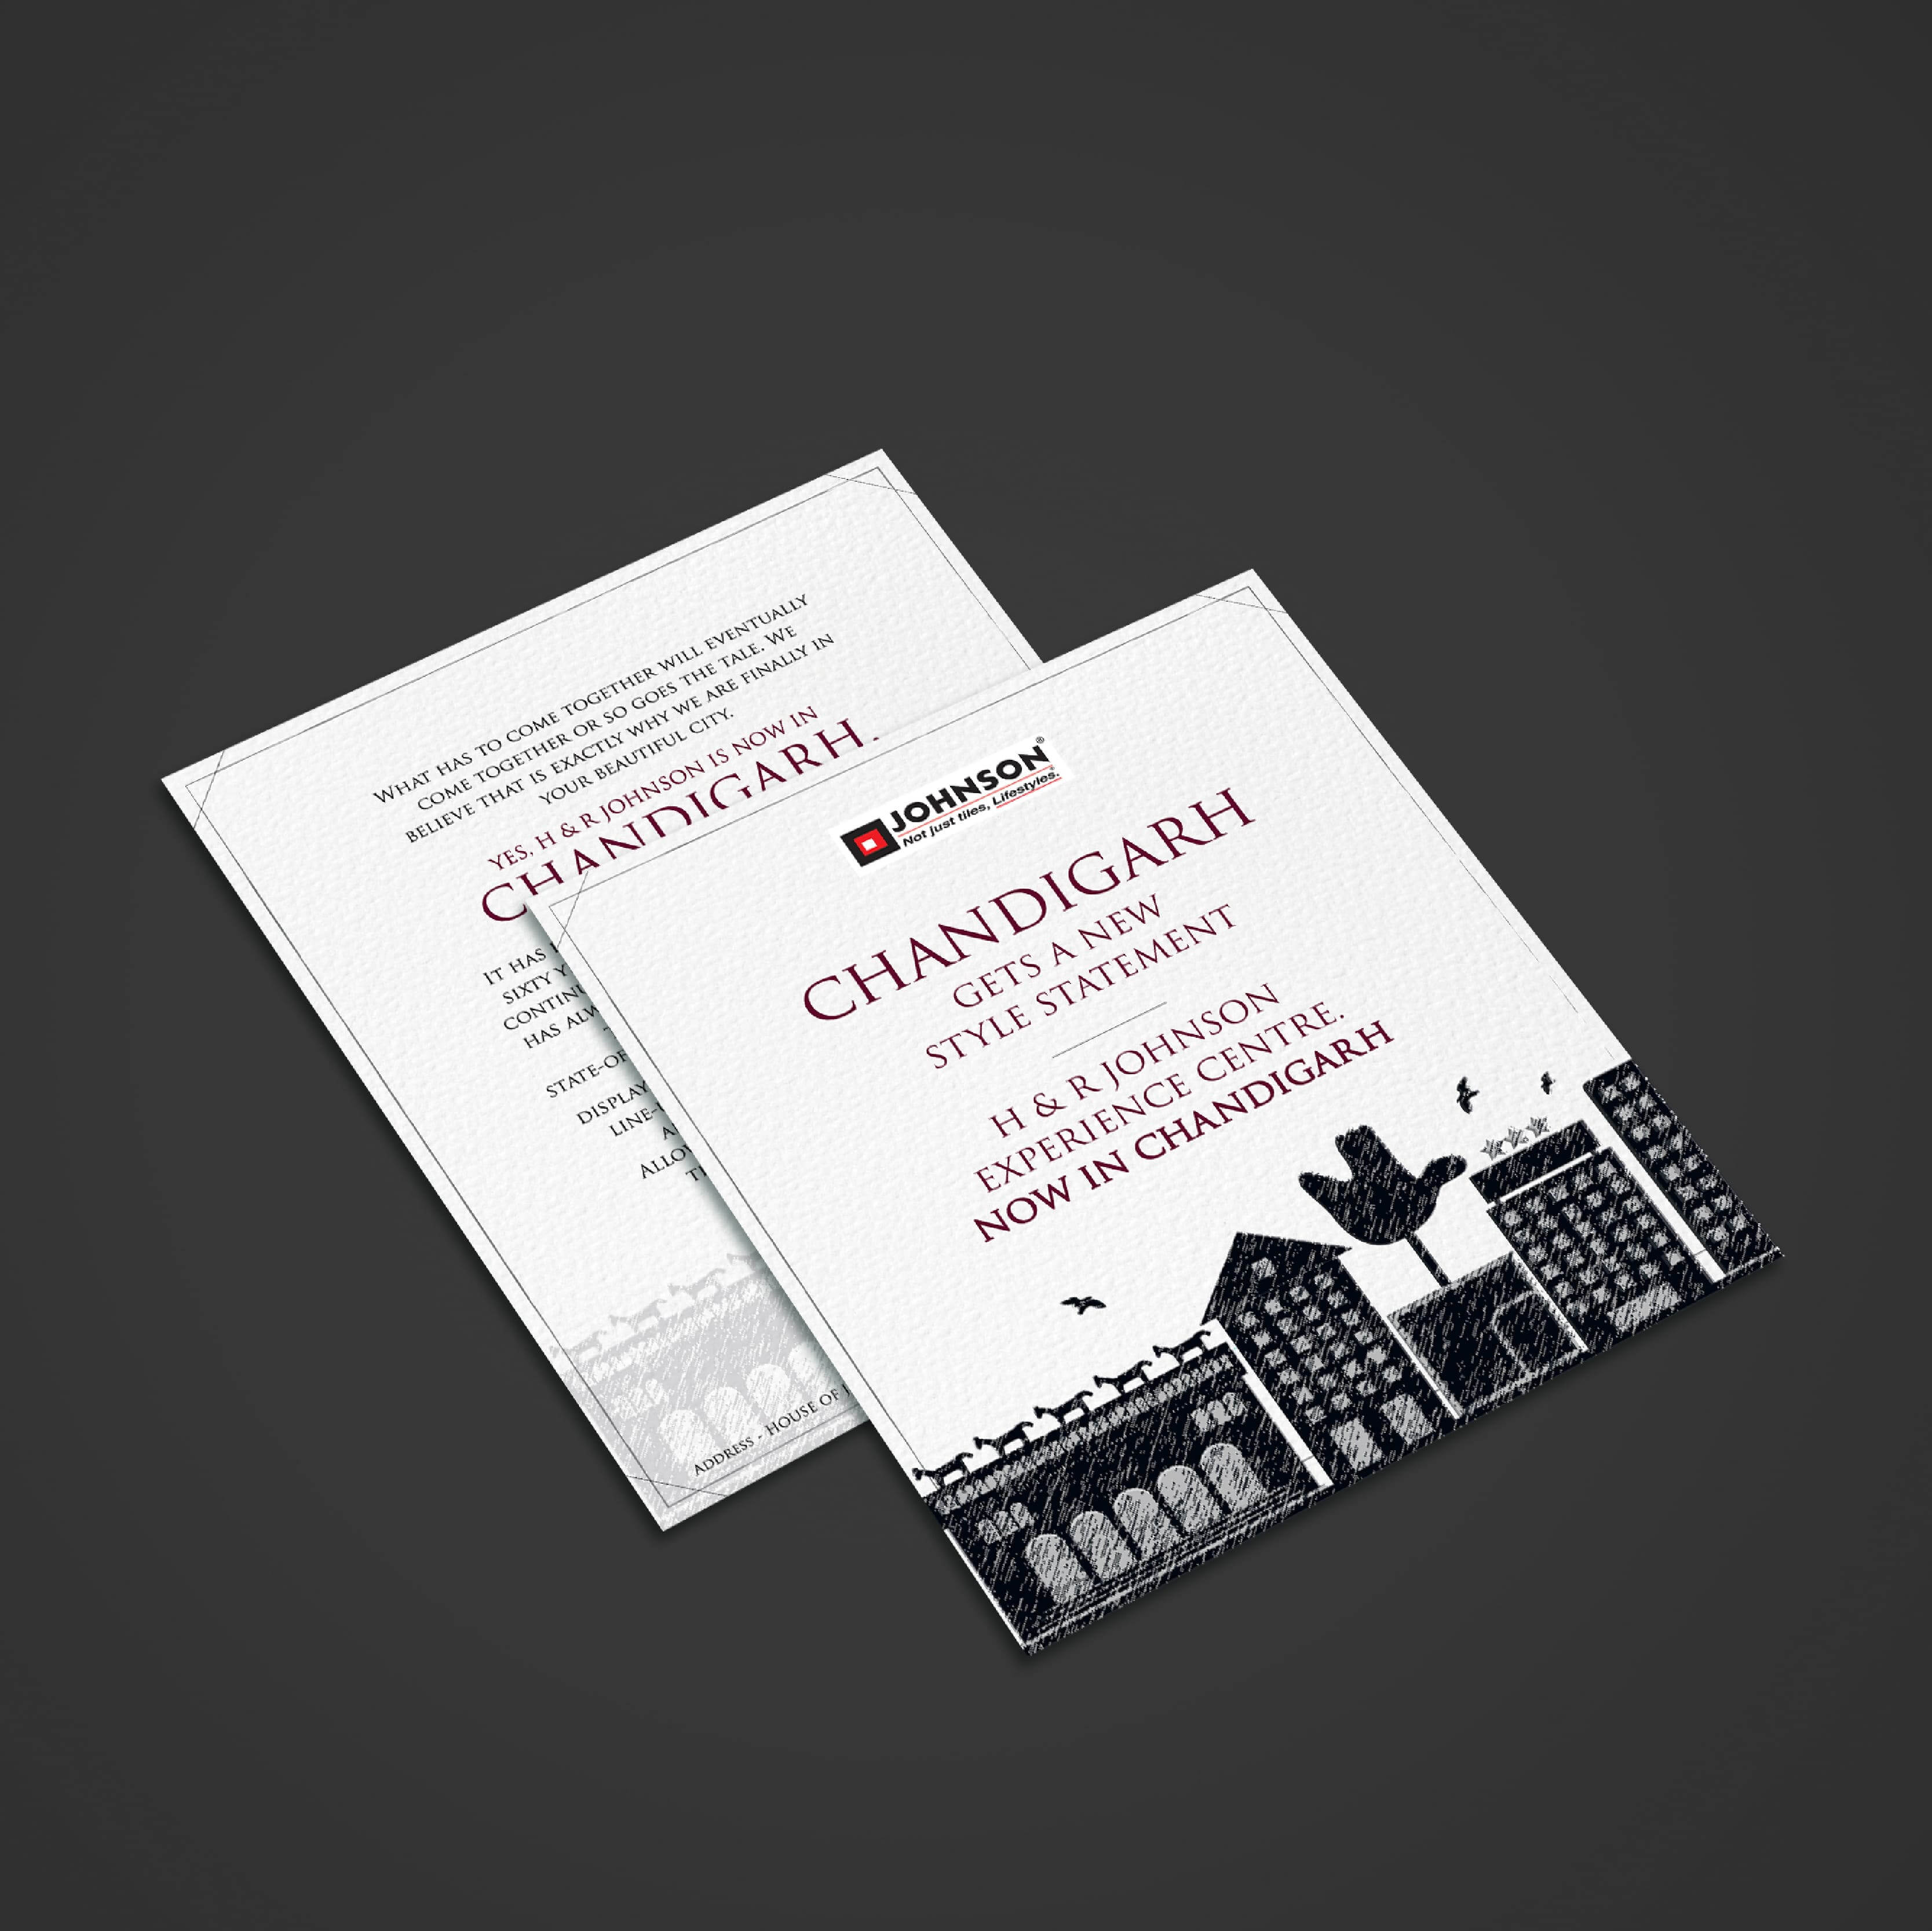 Marketing Collateral designing